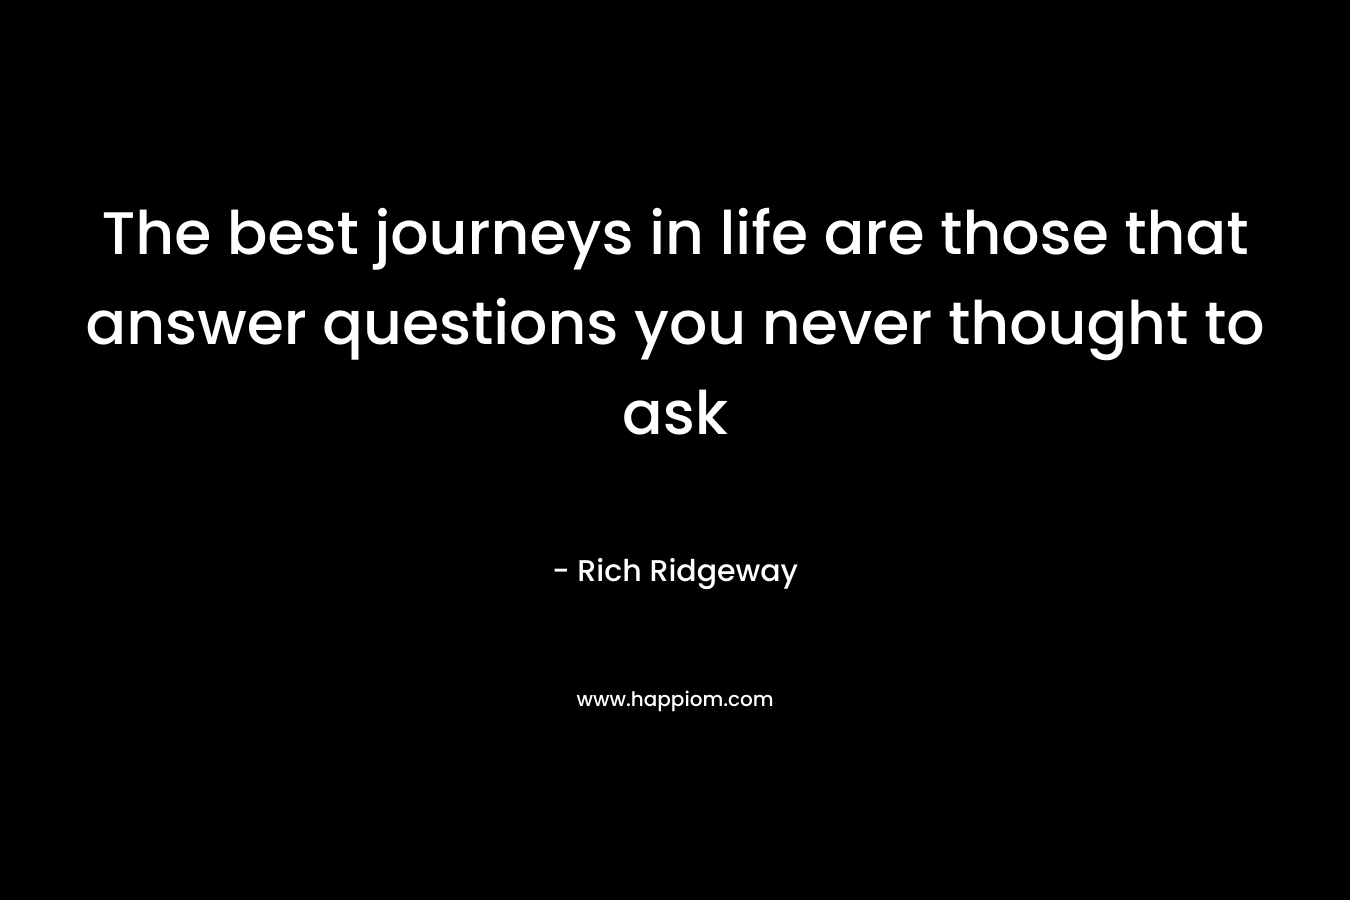 The best journeys in life are those that answer questions you never thought to ask